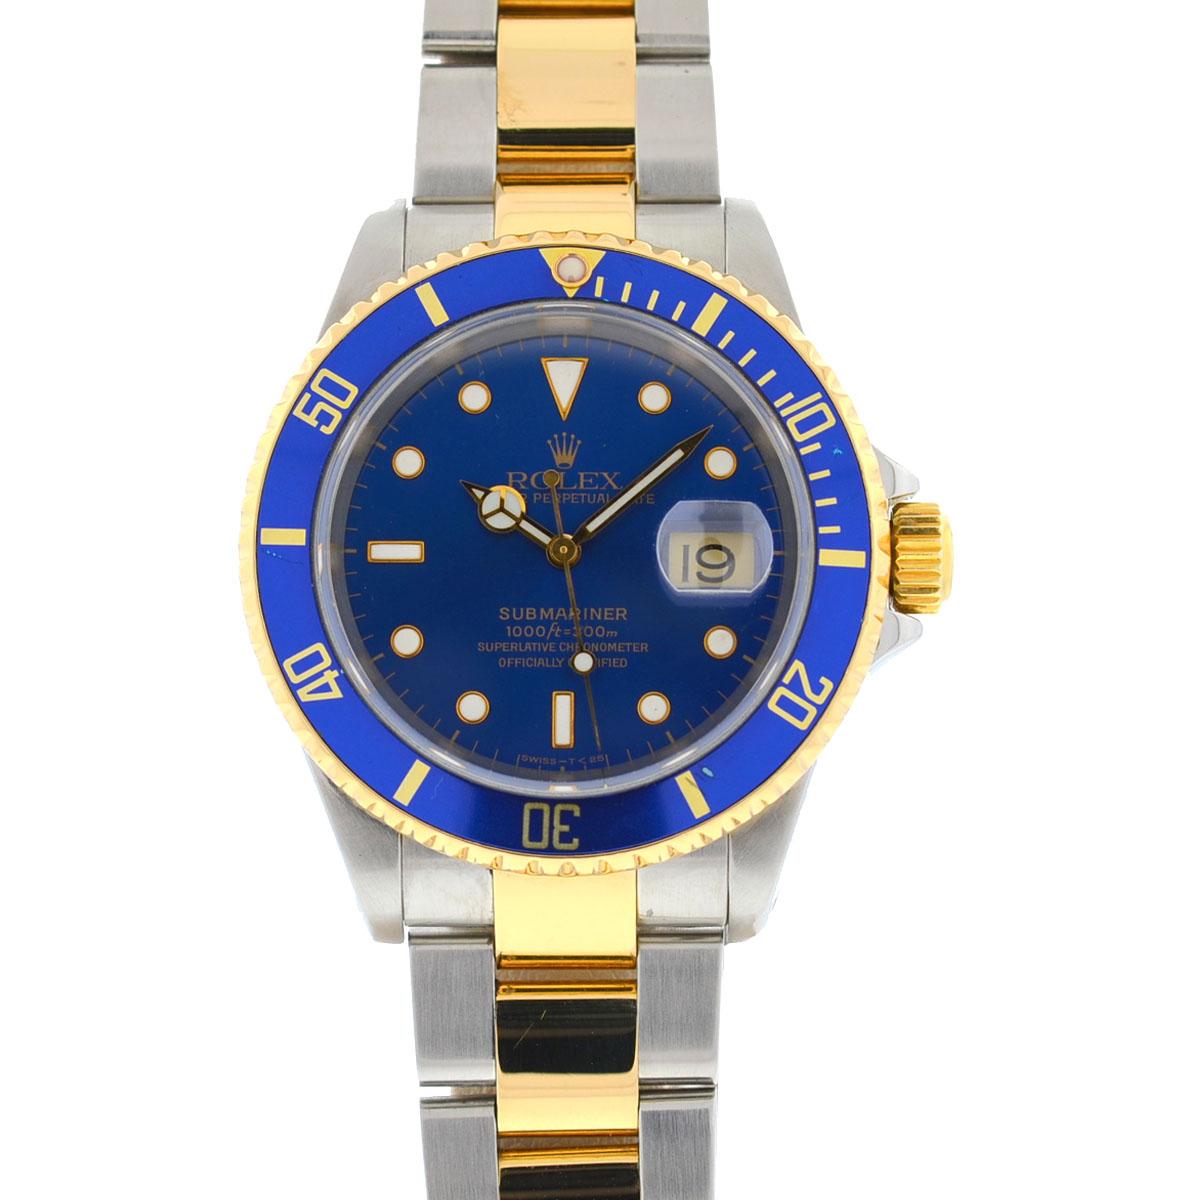 Rolex 16613 Two-Tone Submariner Blue Dial Men's Watch